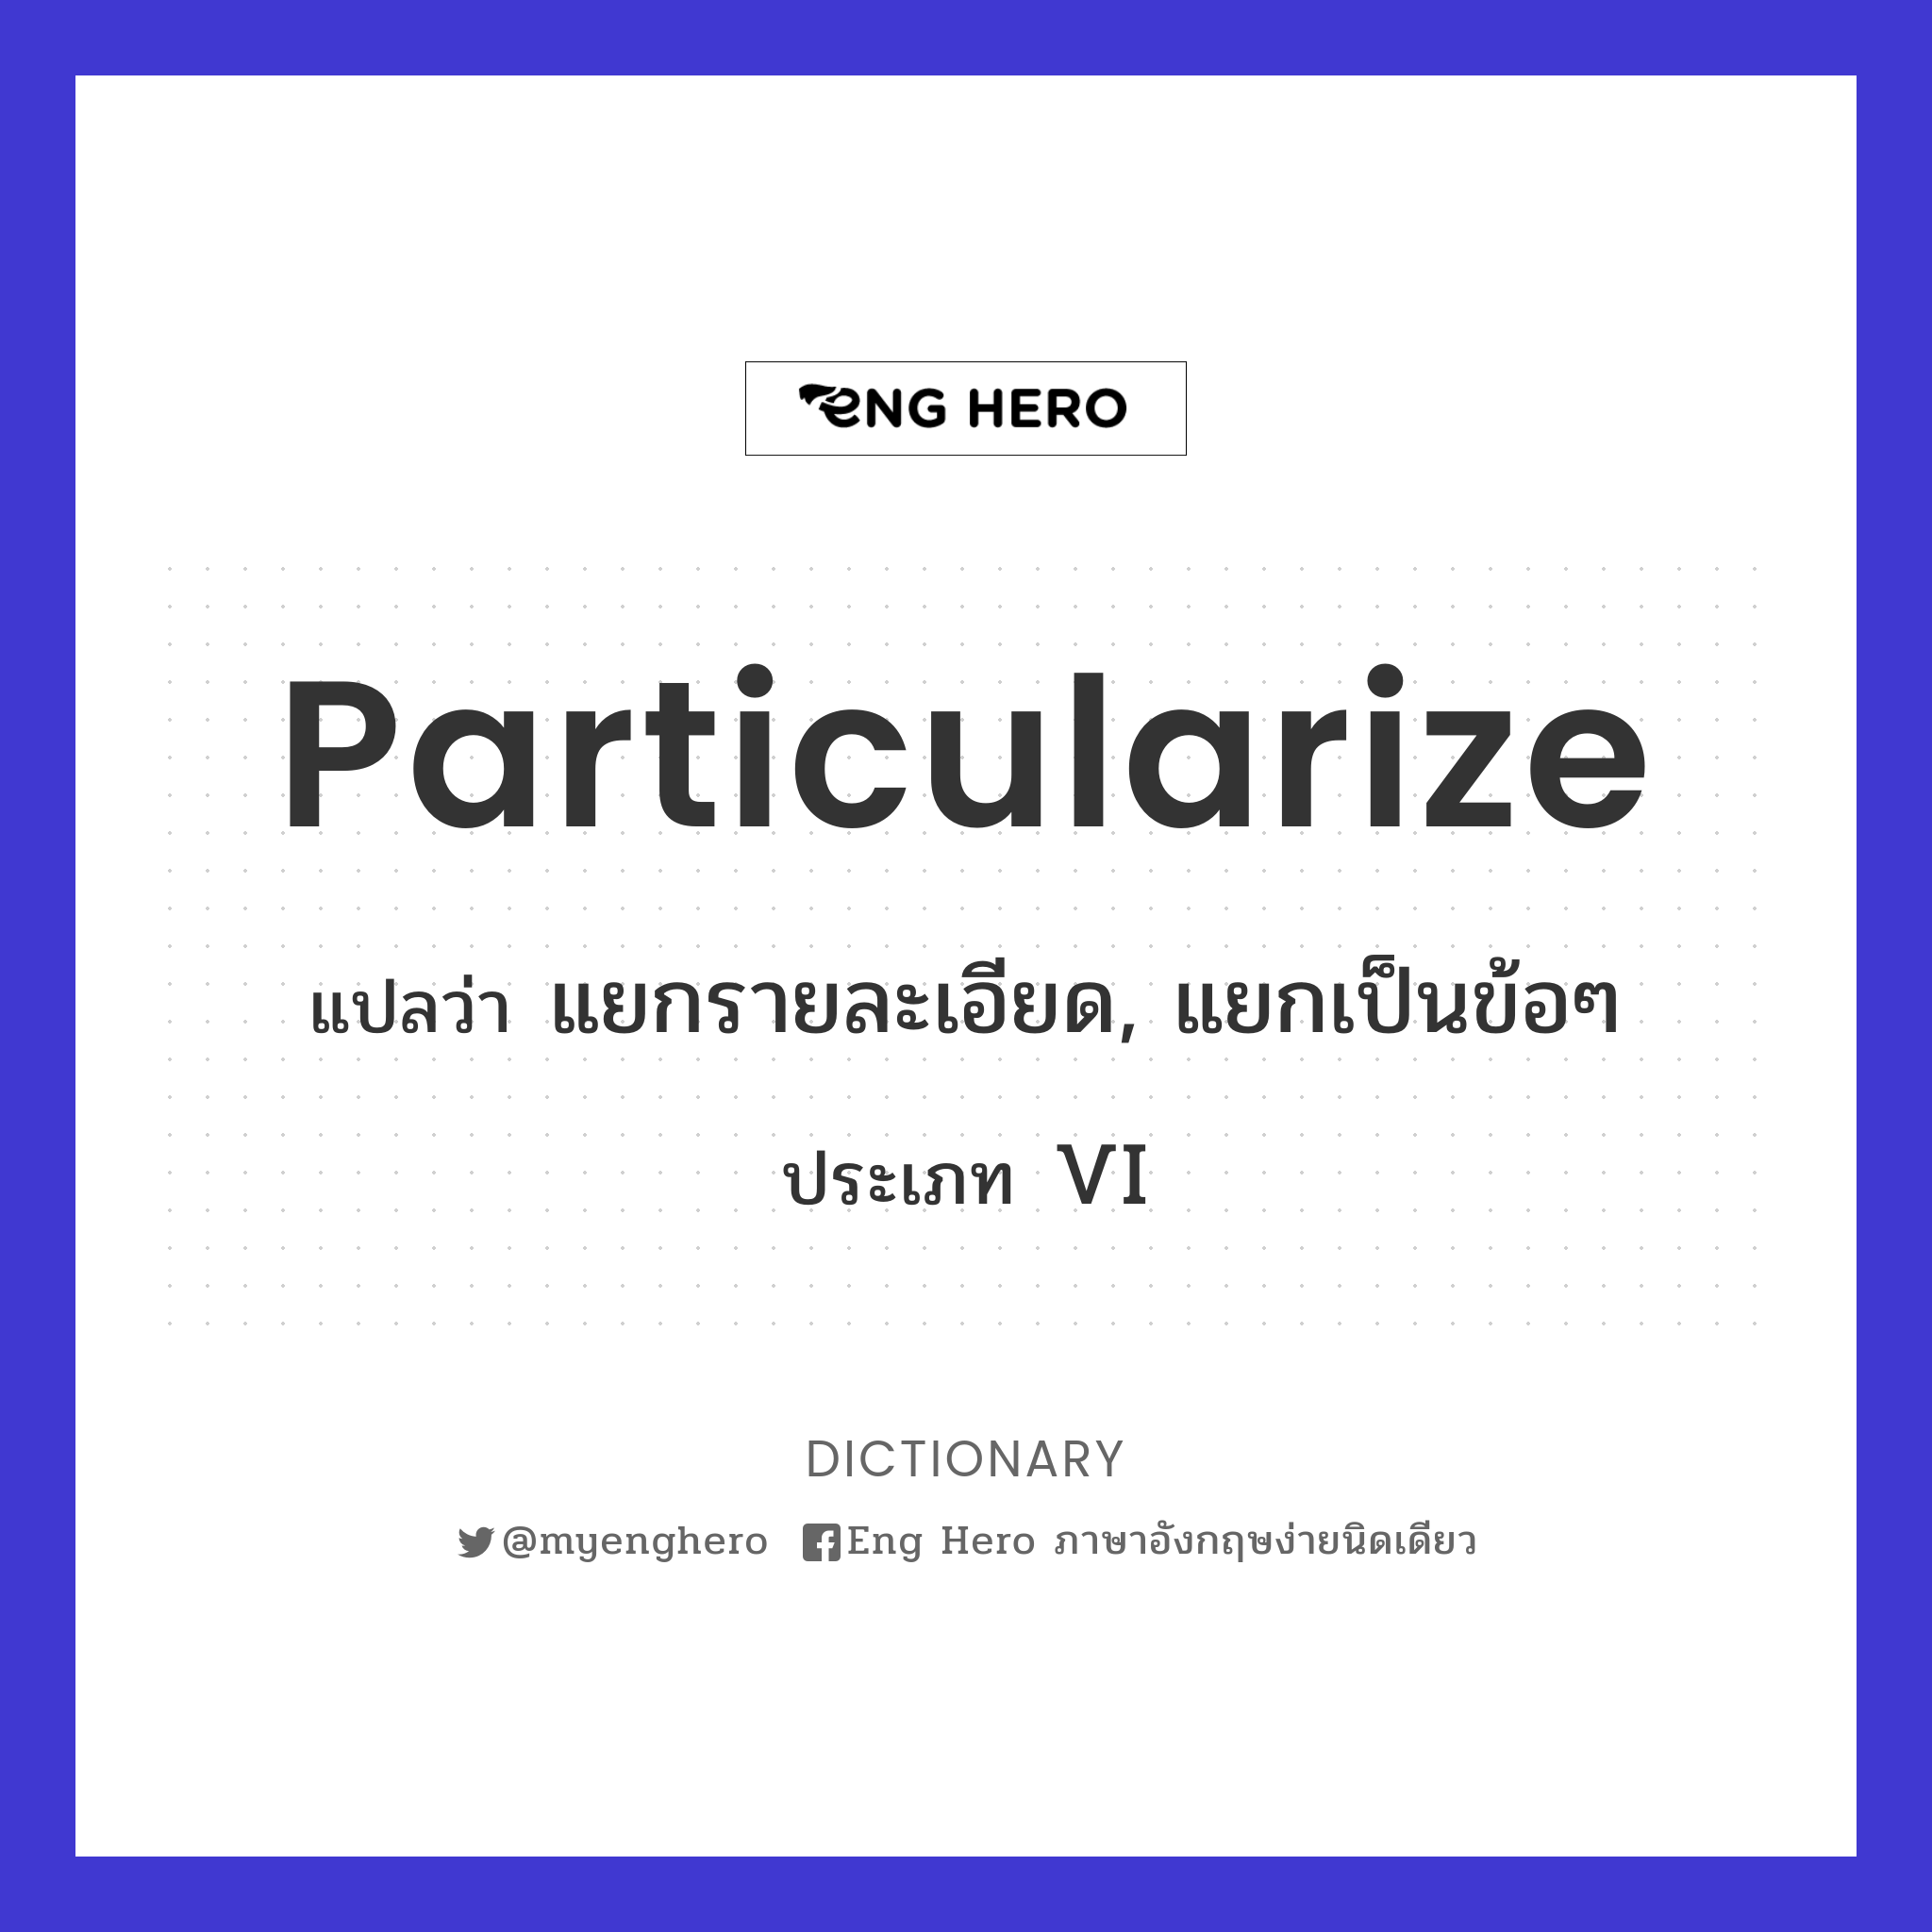 particularize